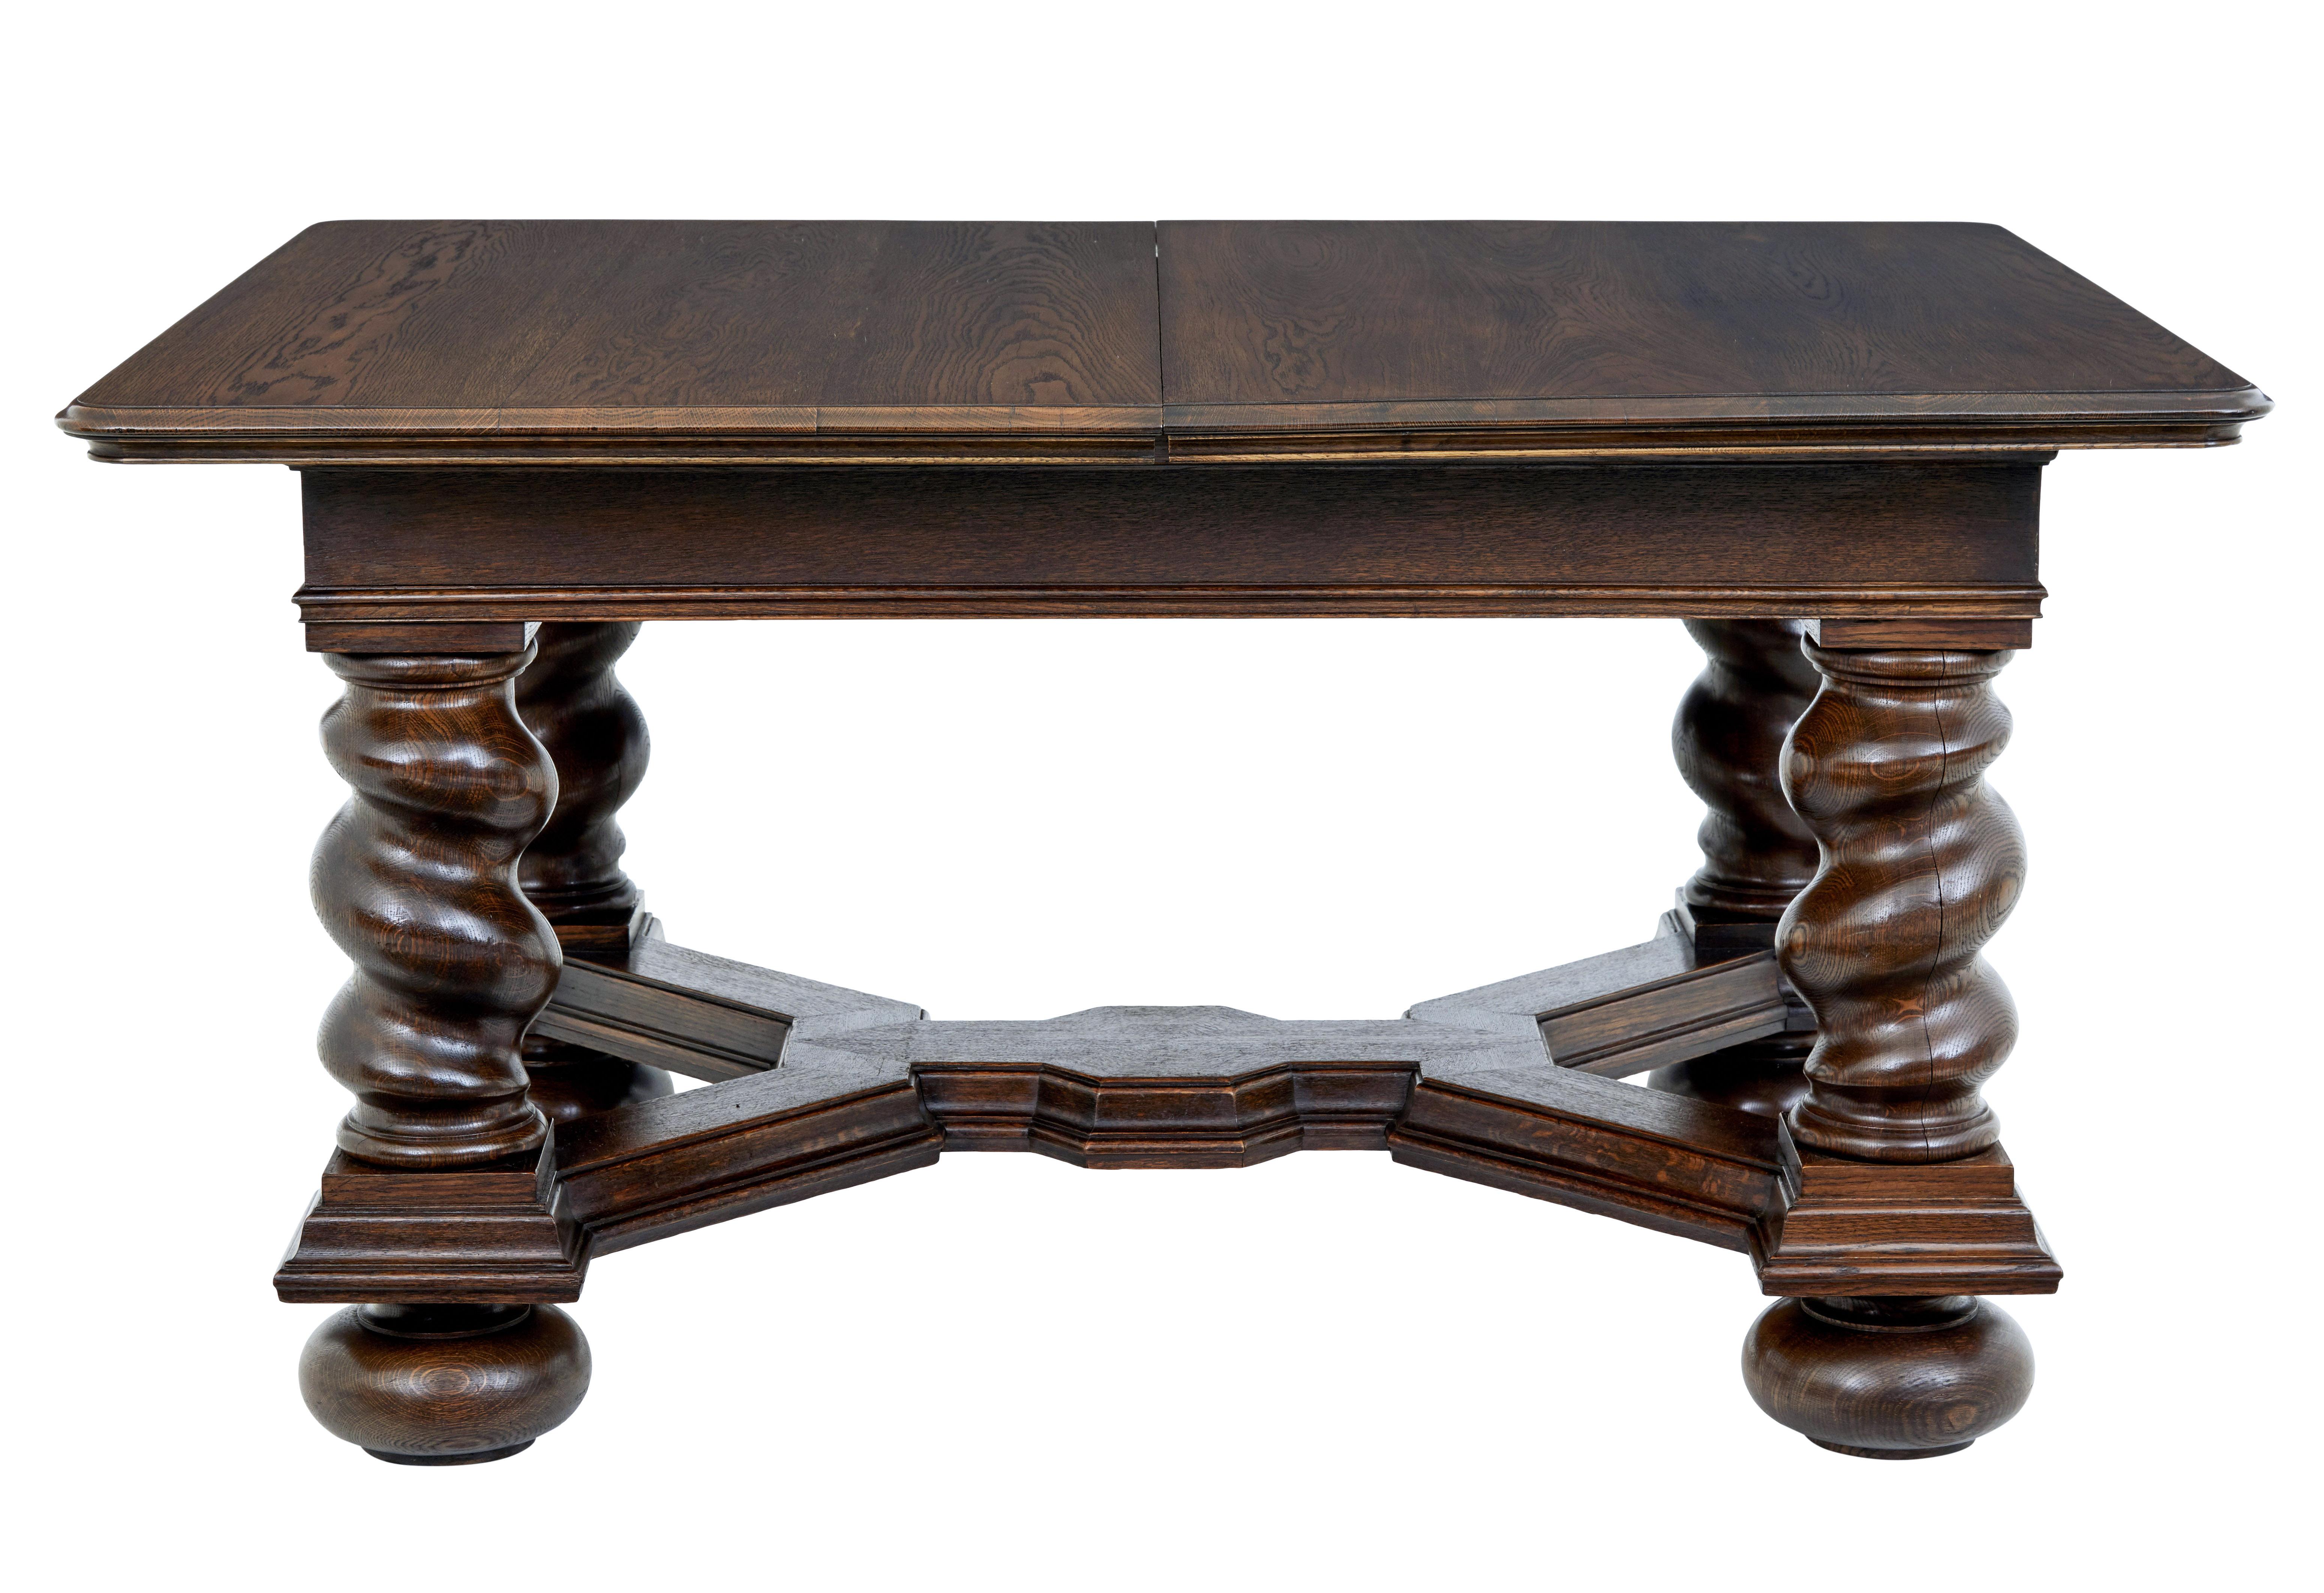 Early 20th century oak extending dining table circa 1900.

Baroque revival table, with oak veneered top standing on a substantial base of barley twist legs united by a stretcher decorated in molding.

Supplied with 3 later leaves which have been